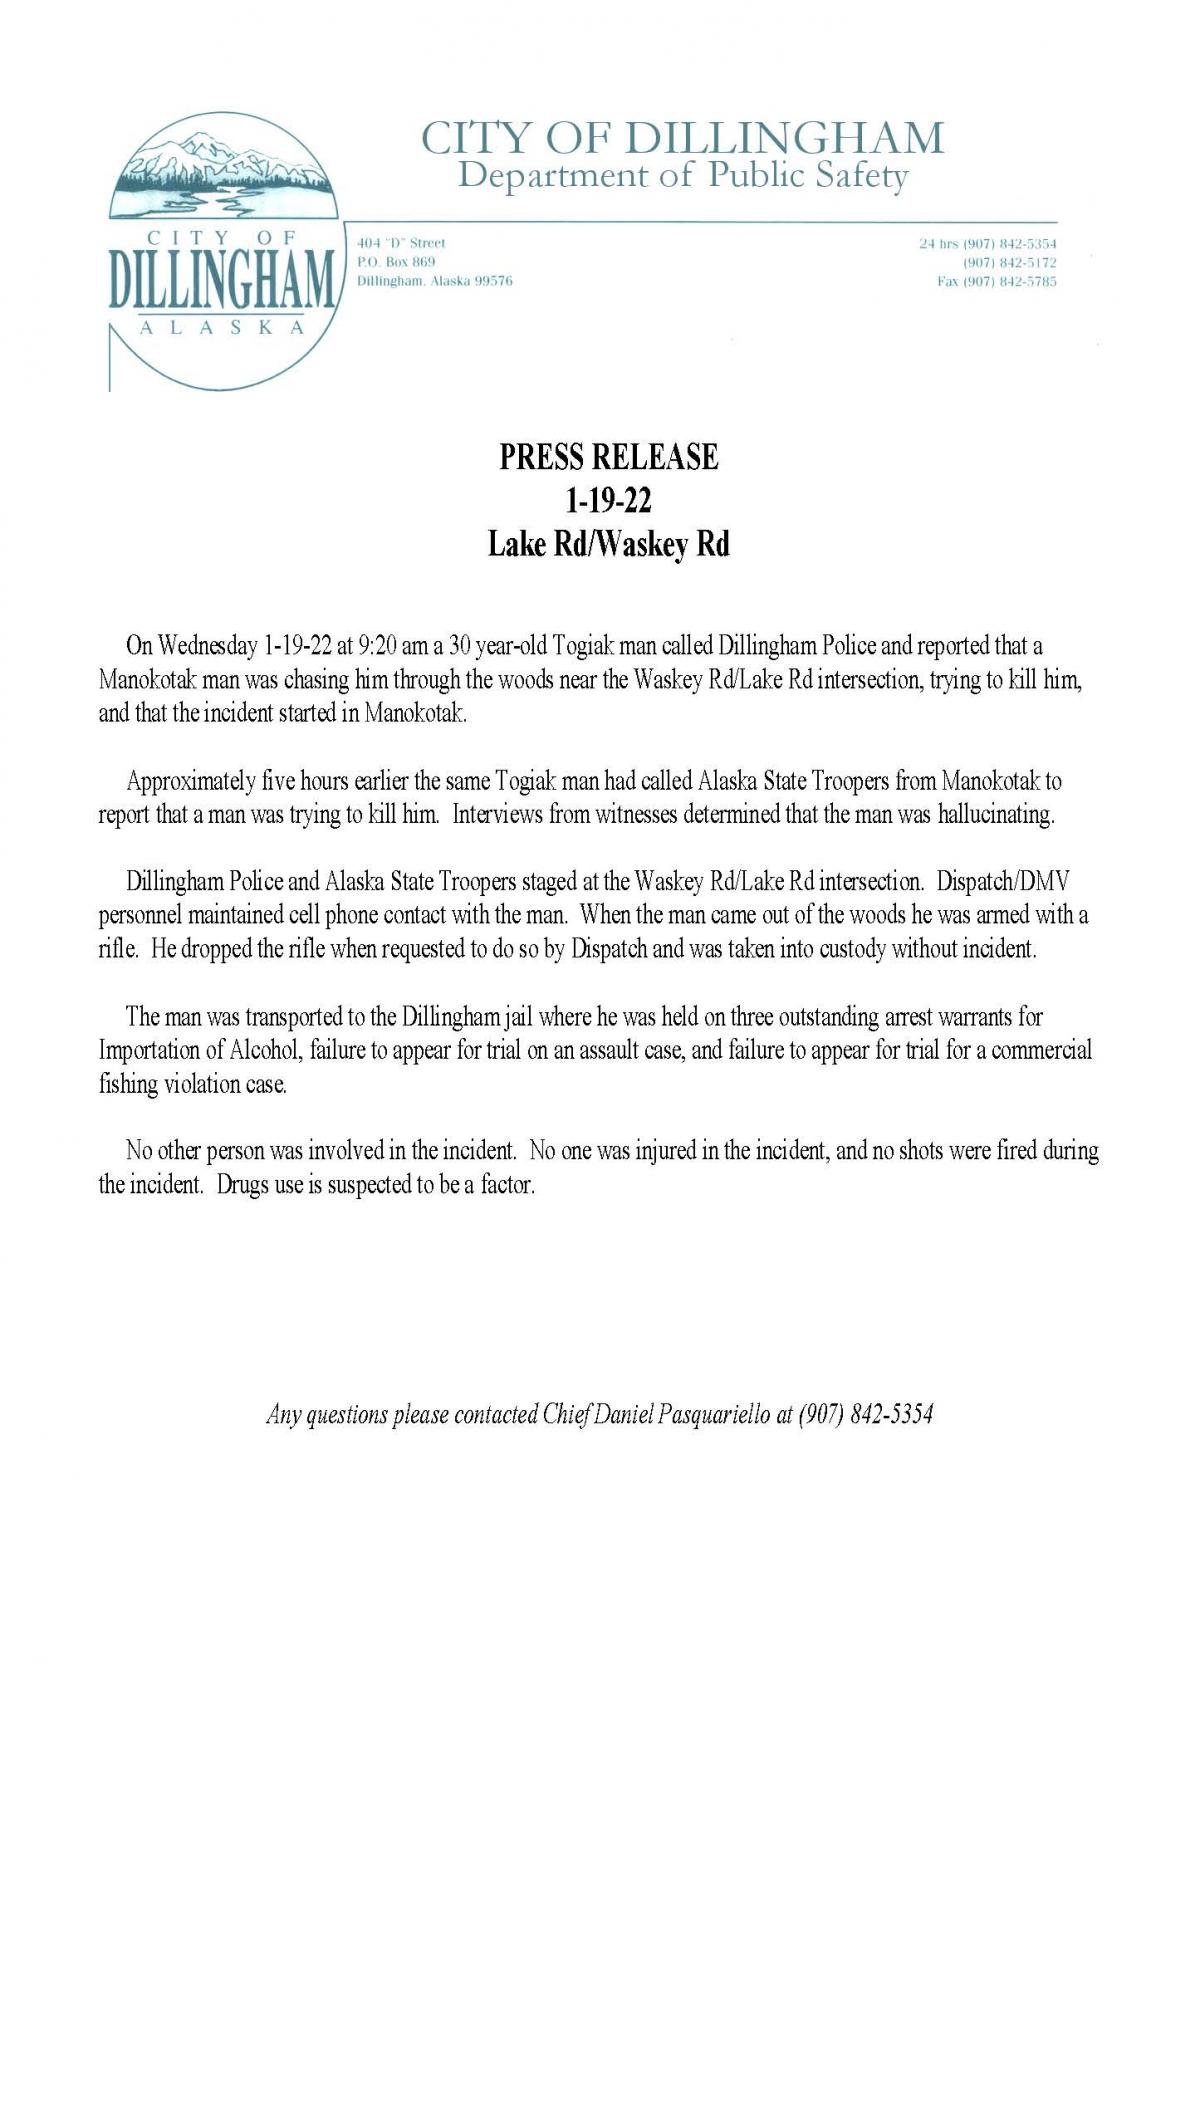 January 19, 2022 City of Dillingham Department of Public Safety Press Release